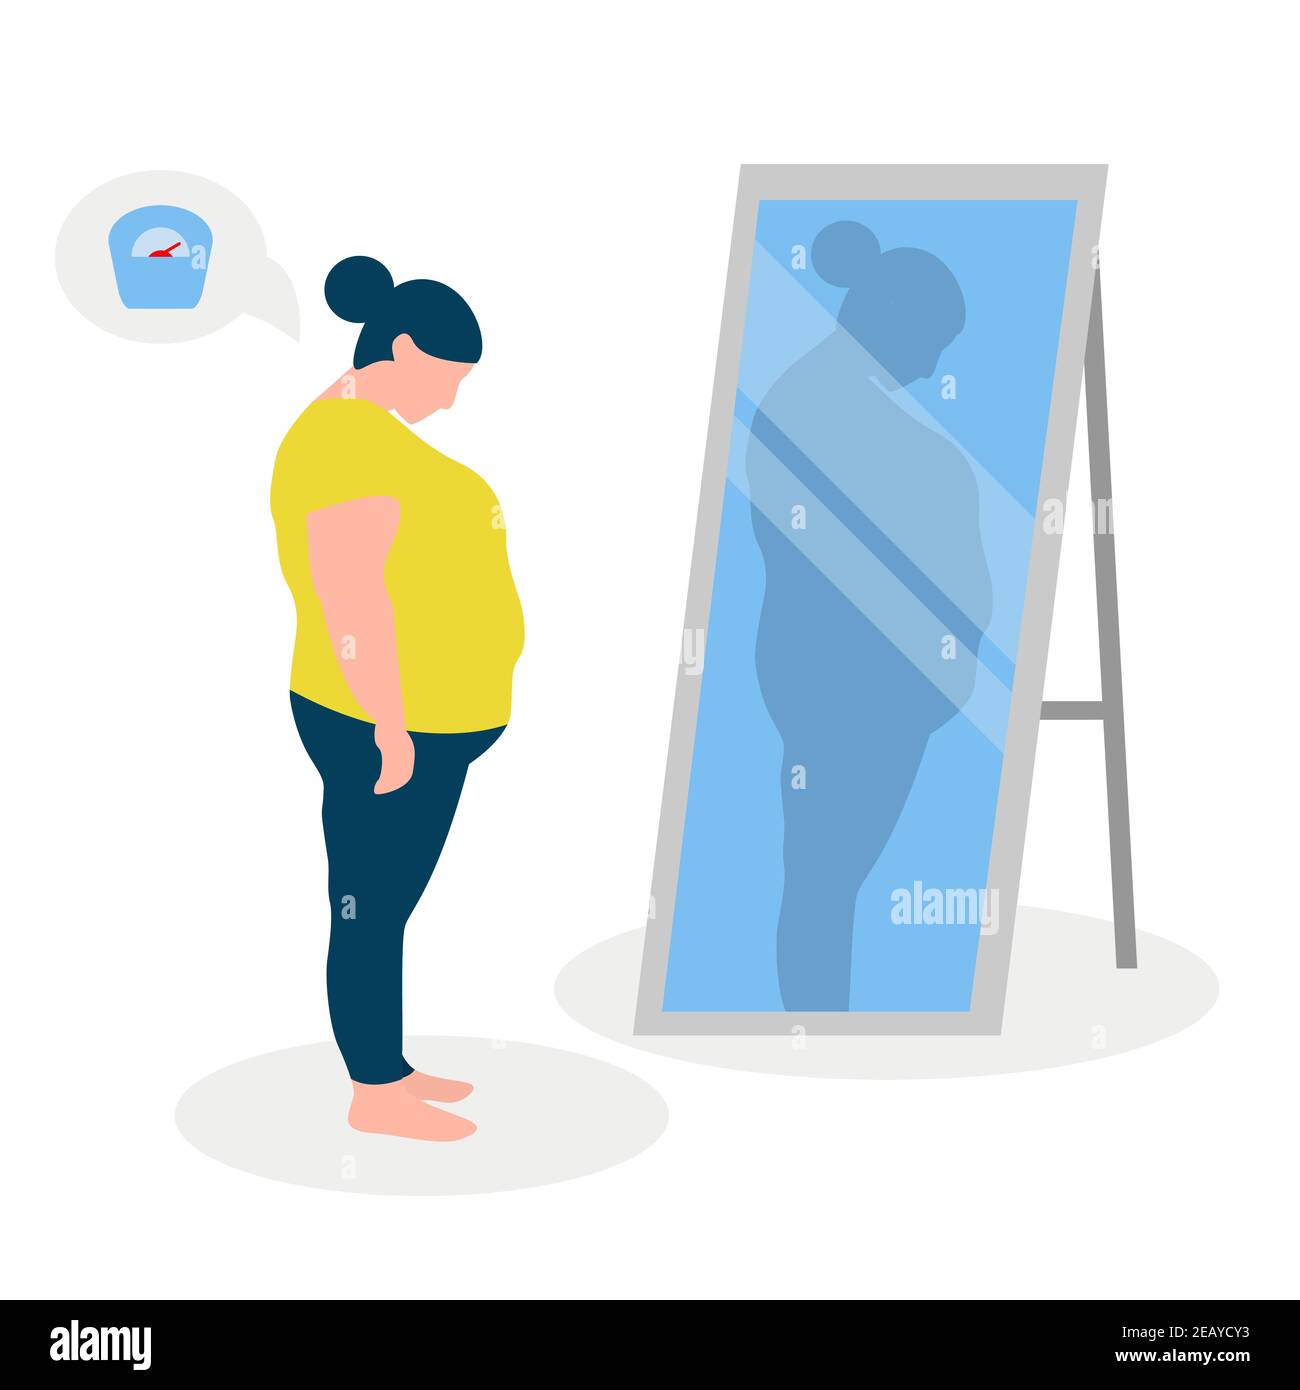 Flat vector illustration of a fat girl with low self-esteem standing in front of a mirror. The girl looks into her distorted reflection. Stock Vector